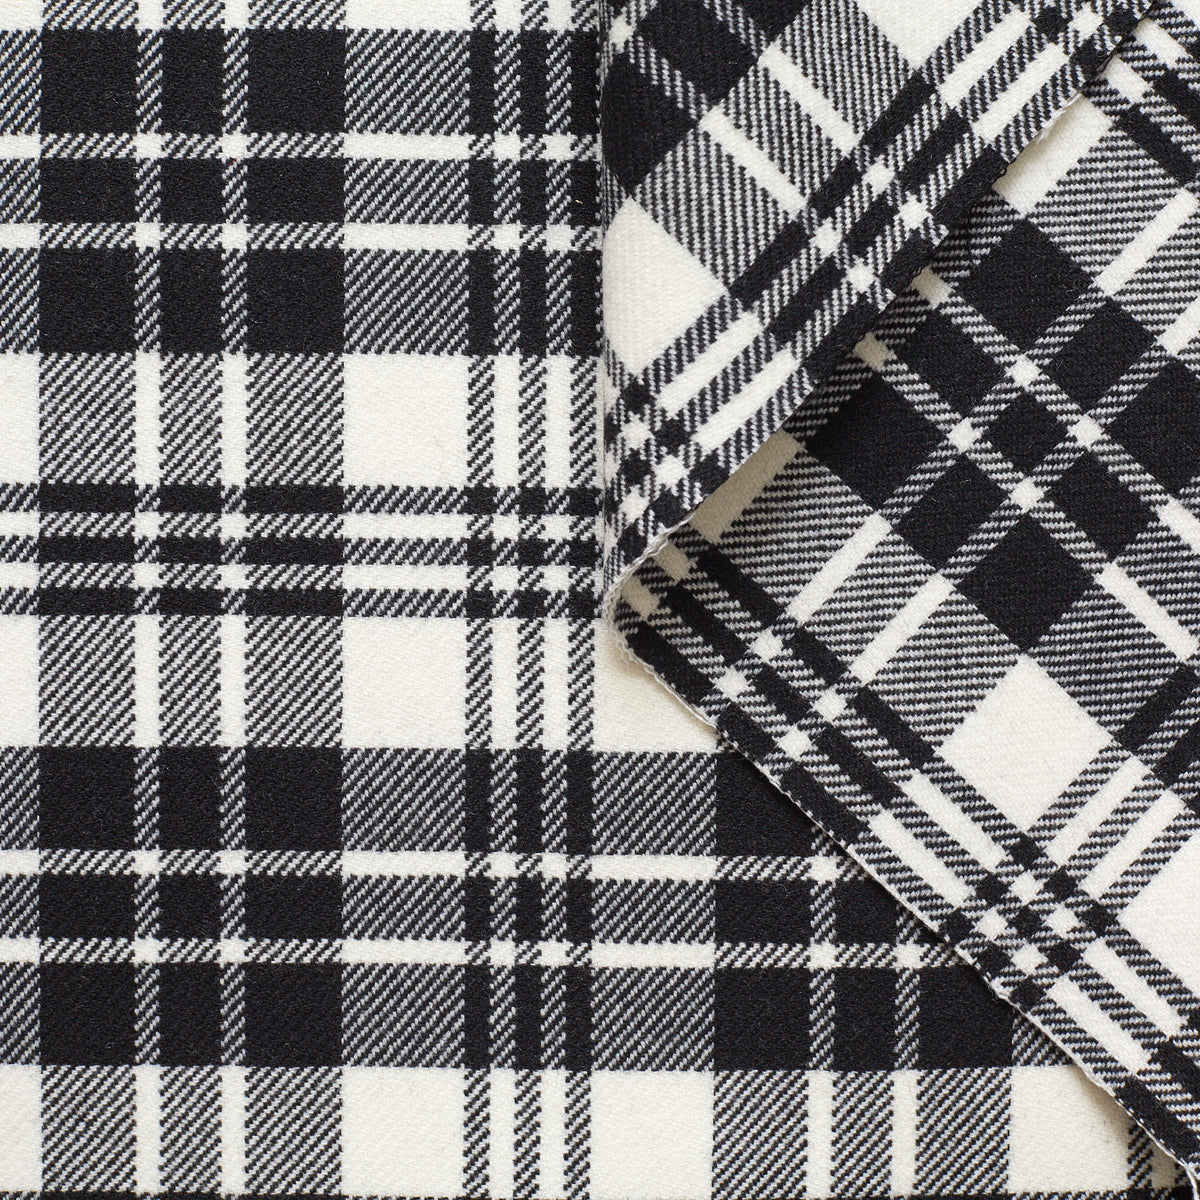 T22N01288 | Splittable Wool & Cashmere Check